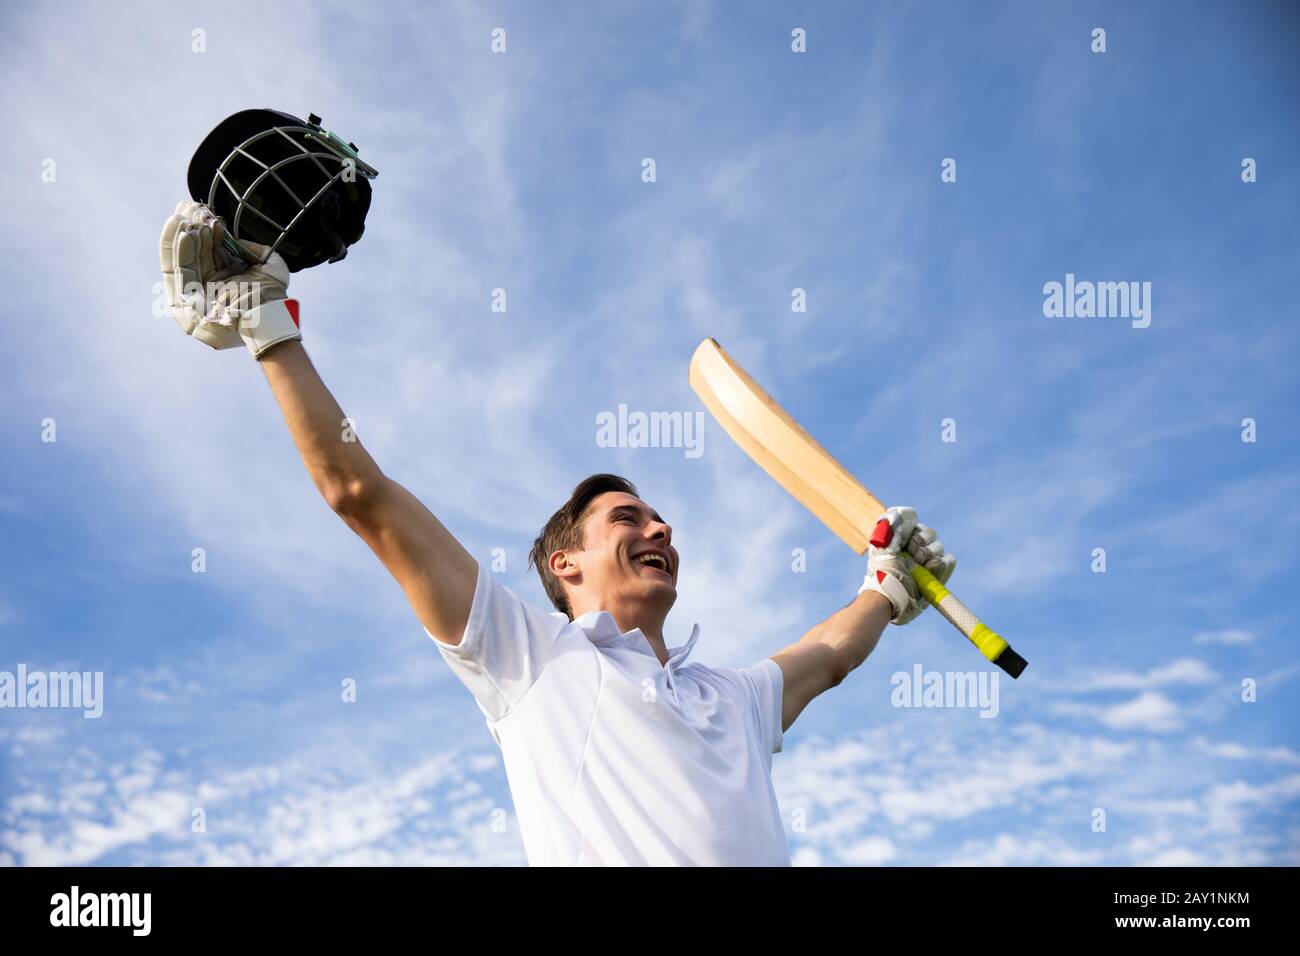 Cricket player happy after training Stock Photo